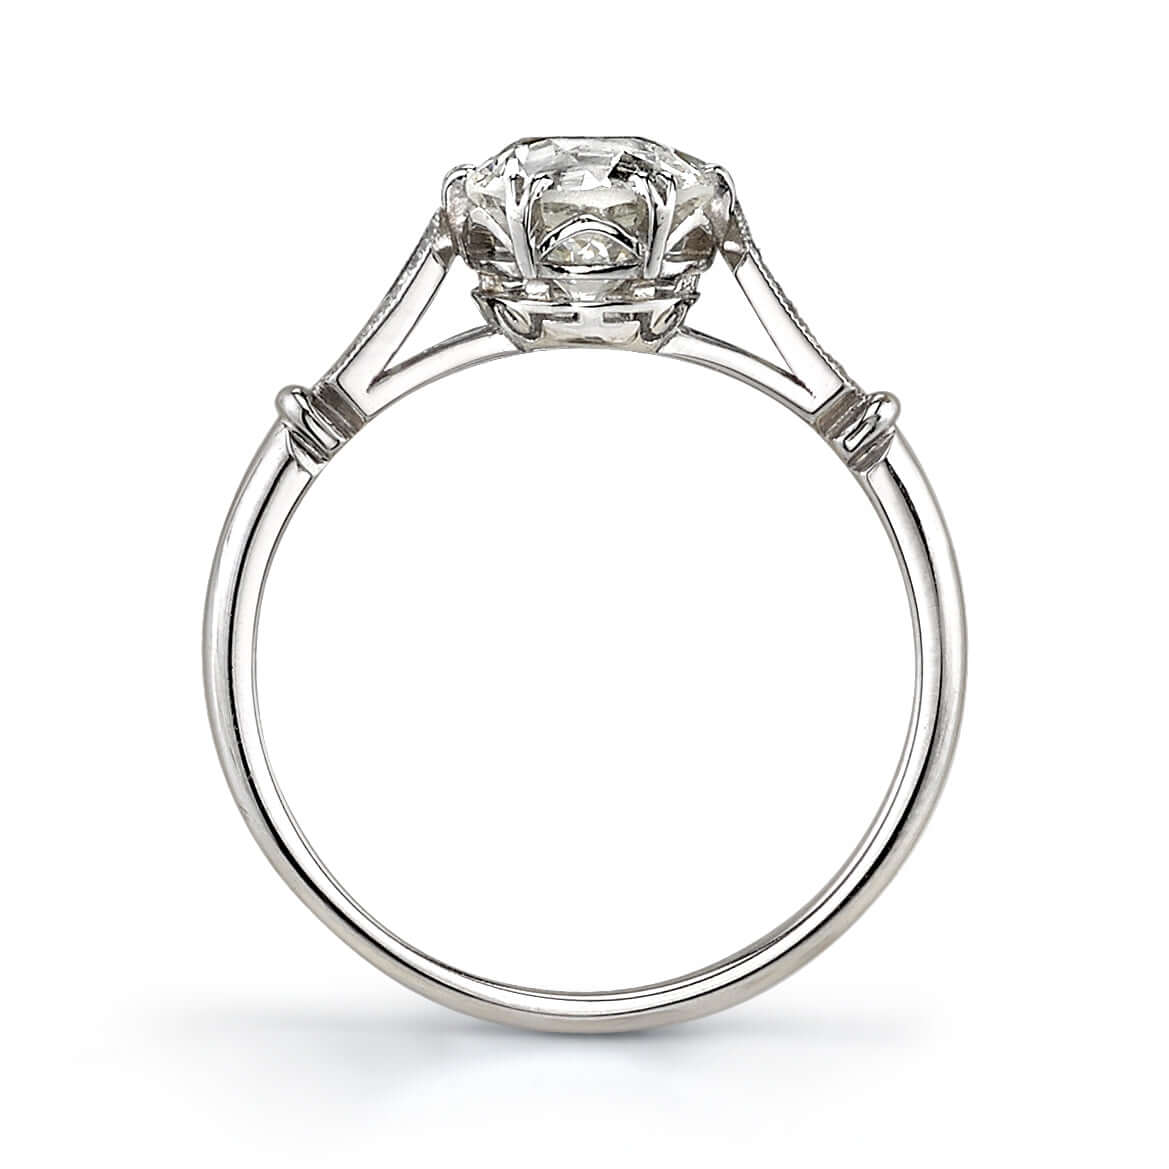 SINGLE STONE CARMEN RING featuring 1.14ct L/SI2 GIA certified old European cut diamond with 0.09ctw old European cut accent diamonds set in a handcrafted platinum mounting.